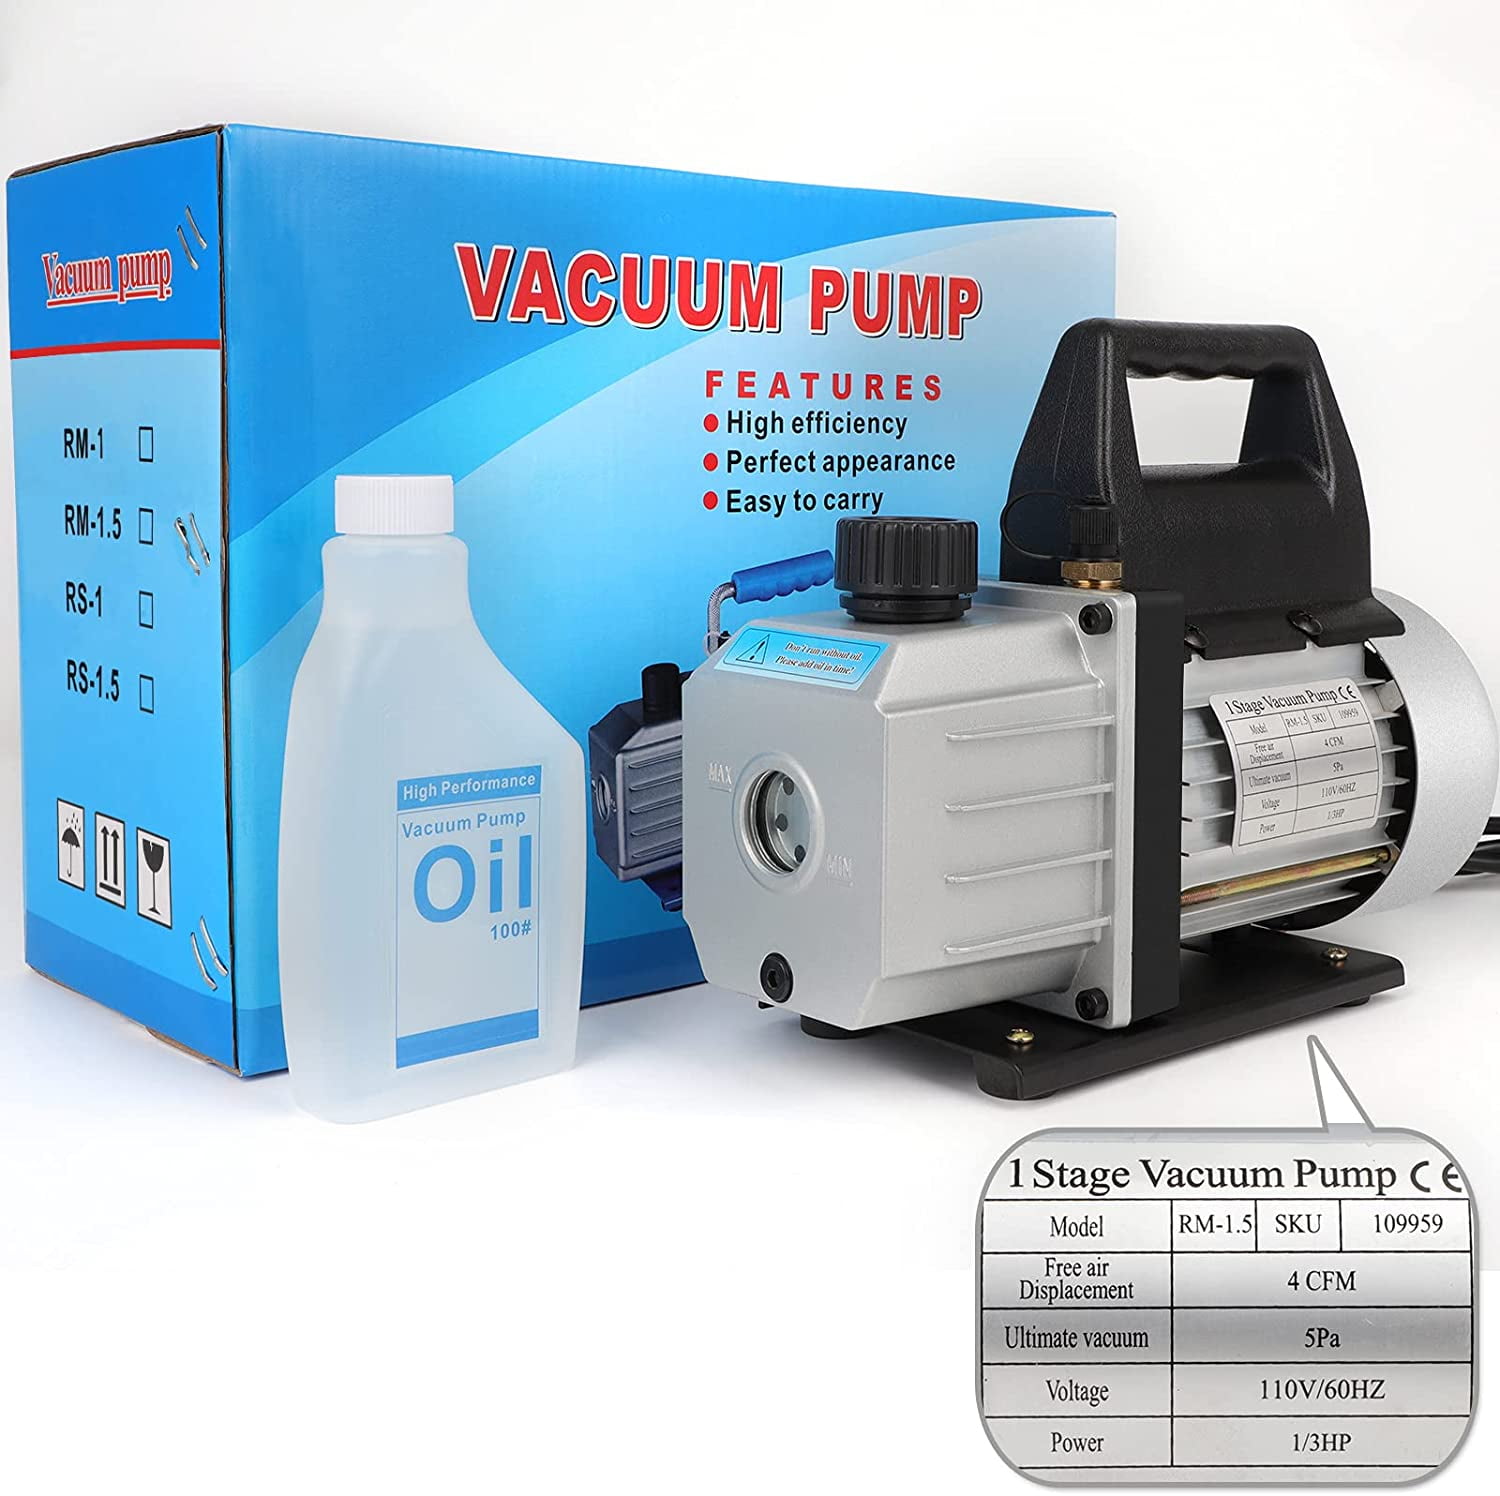 4 CFM Rotary Vane Deep Vacuum Pump 1/3HP Refrigerant 5 PA AC Air Tool 110V 60Hz Wine Degassing or Epoxy Manifold Gauge Milk and Medical Processing Durable and Reliable Pump Single Stage Pump